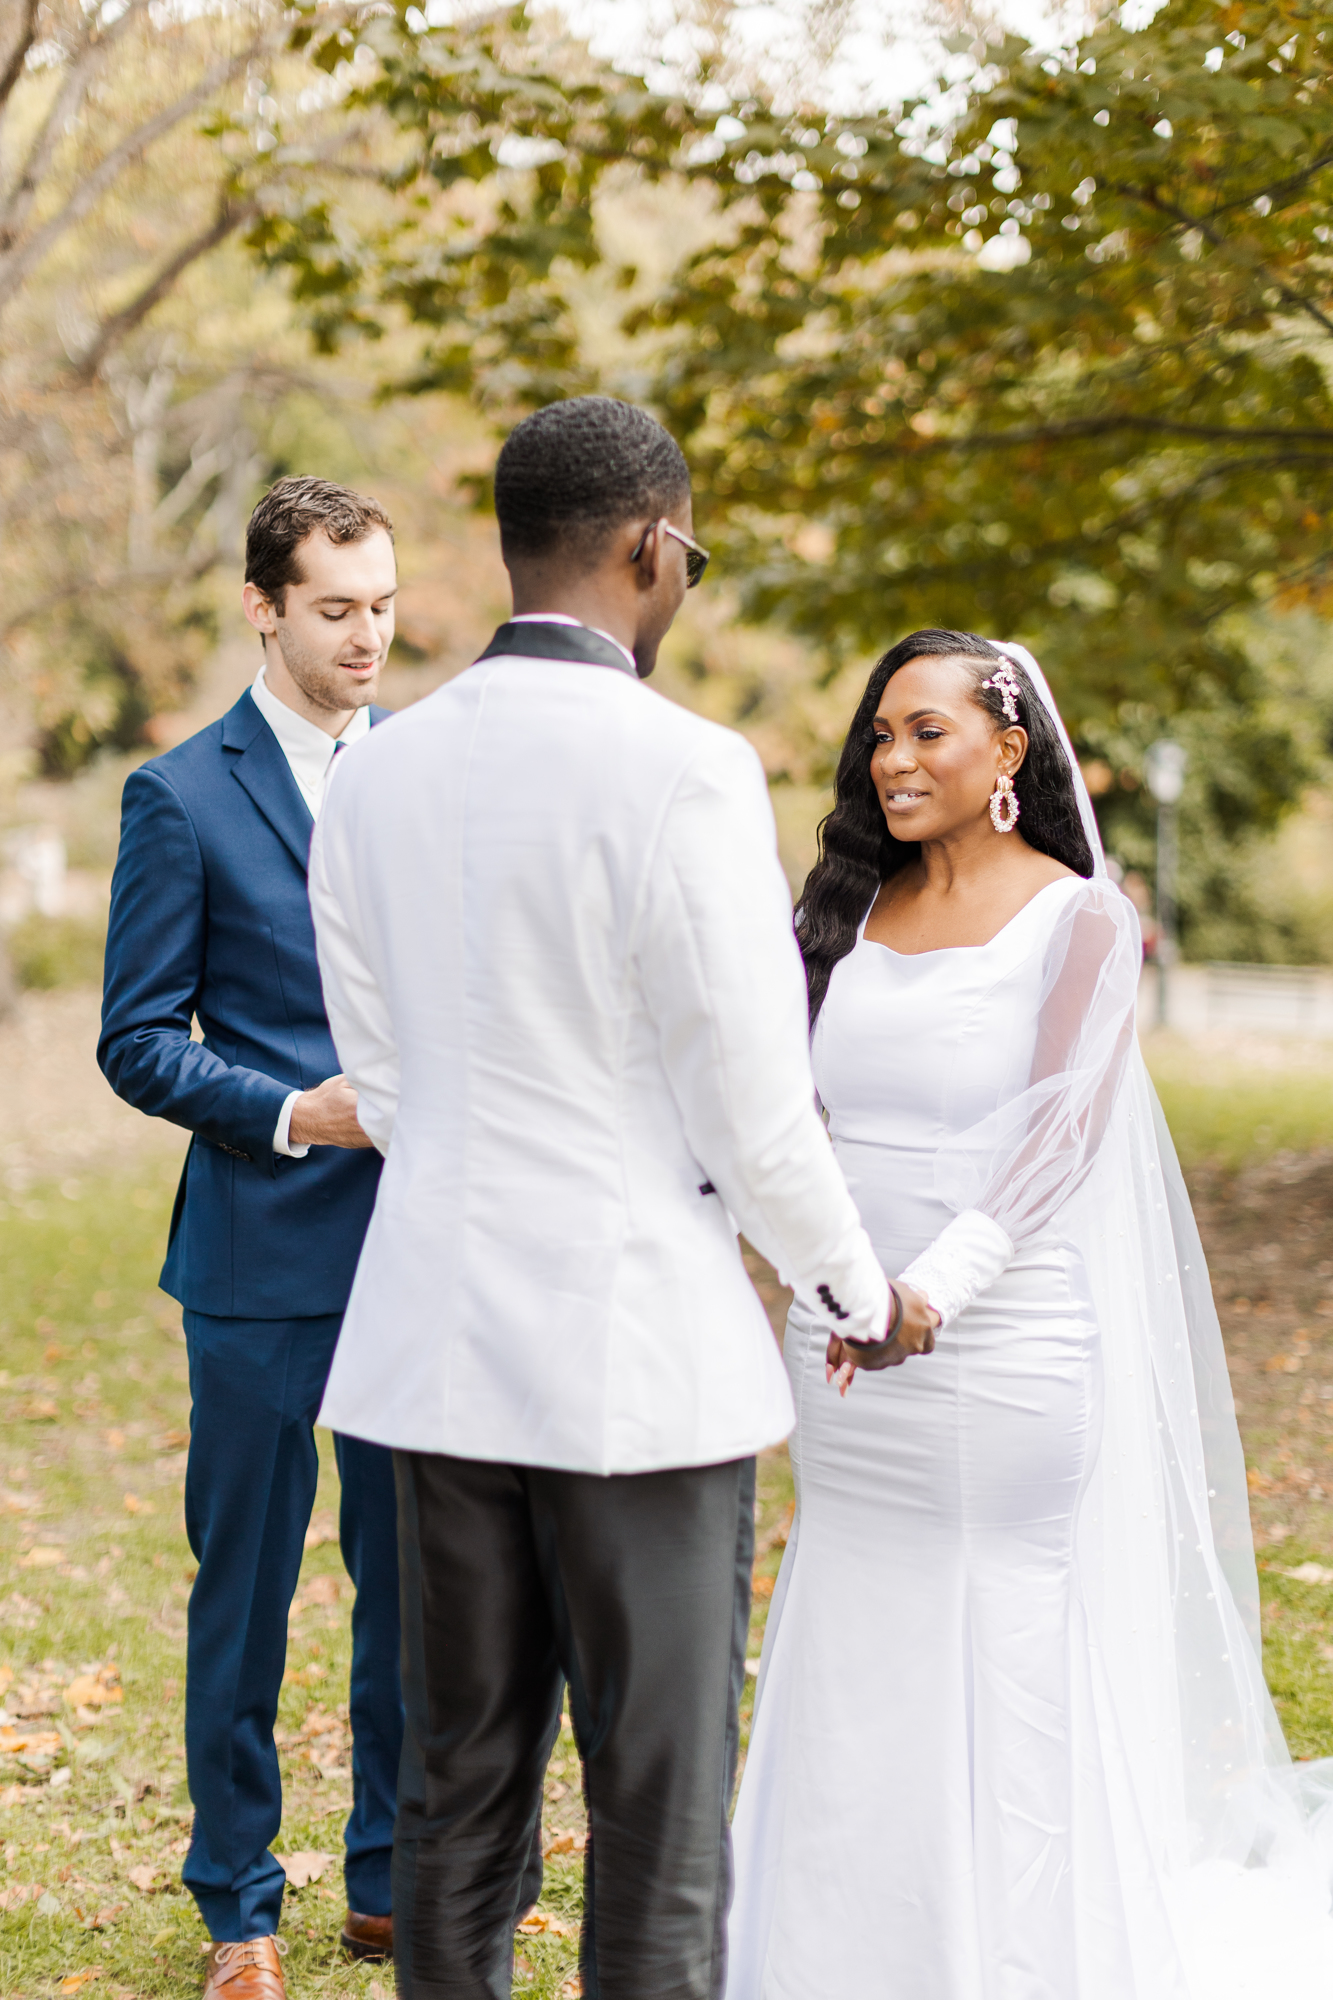 Timeless Central Park Wedding Photos on Cherry Hill in Fall